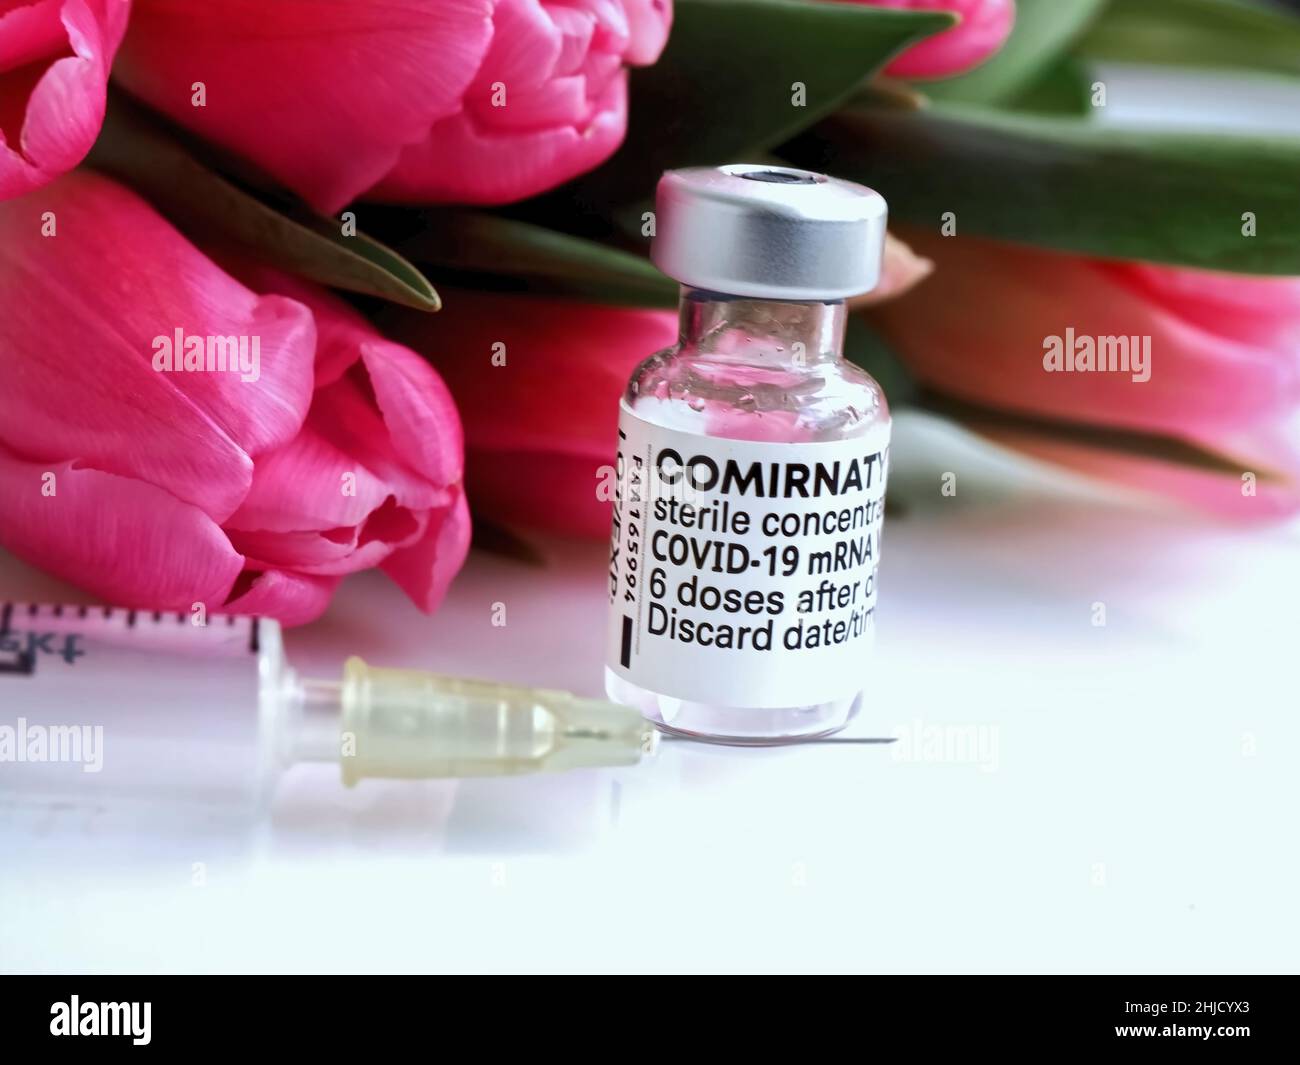 Comirrnaty vaccination ampoule with a syringe against covid-19 or Corona virus with flowers Stock Photo